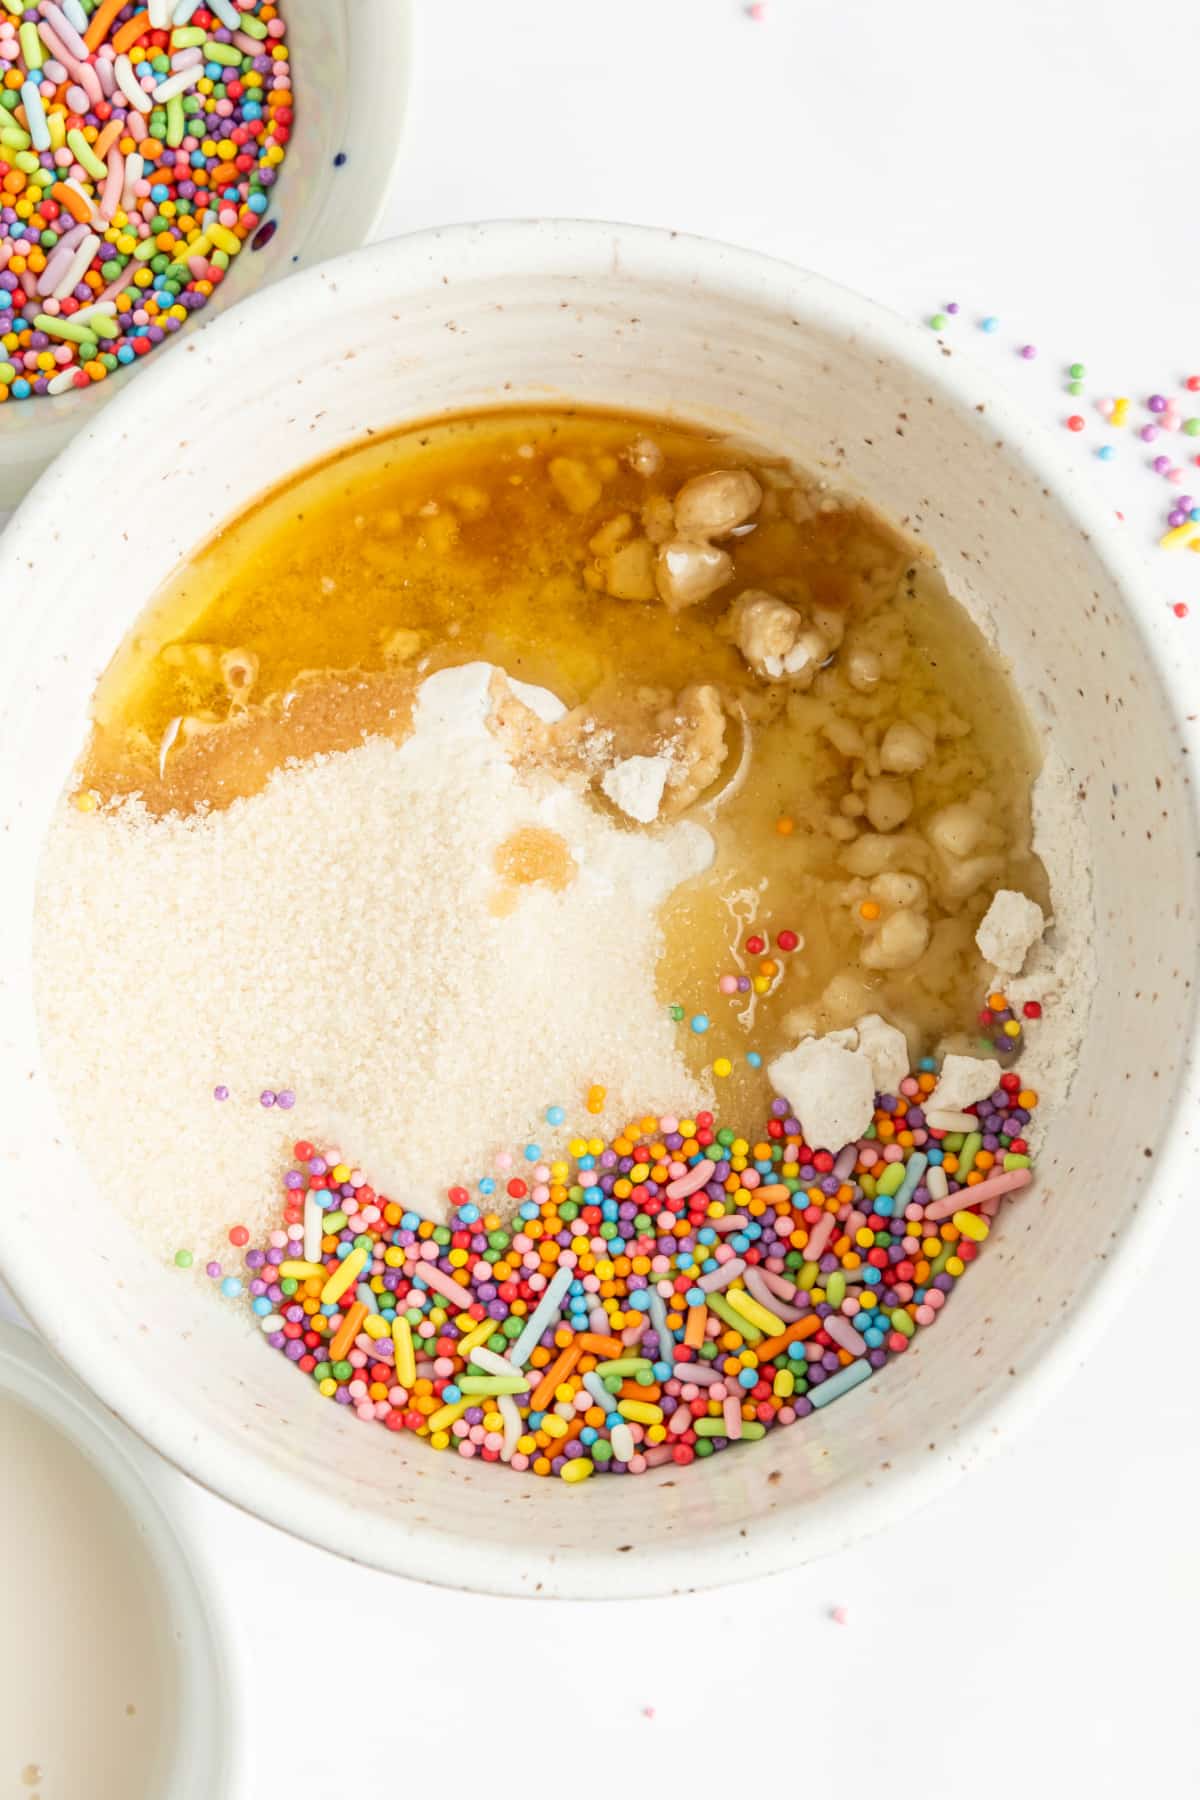 A white mixing bowl of muffin batter before mixing: melted butter, vanilla, flour, and sprinkles.